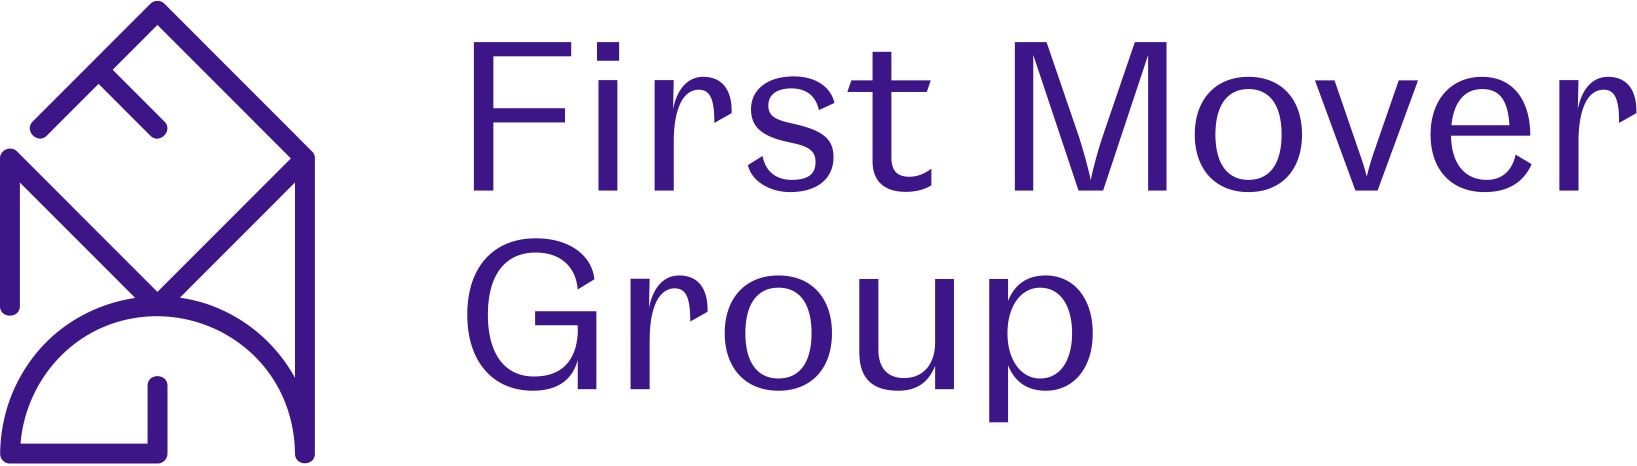 First Mover Group